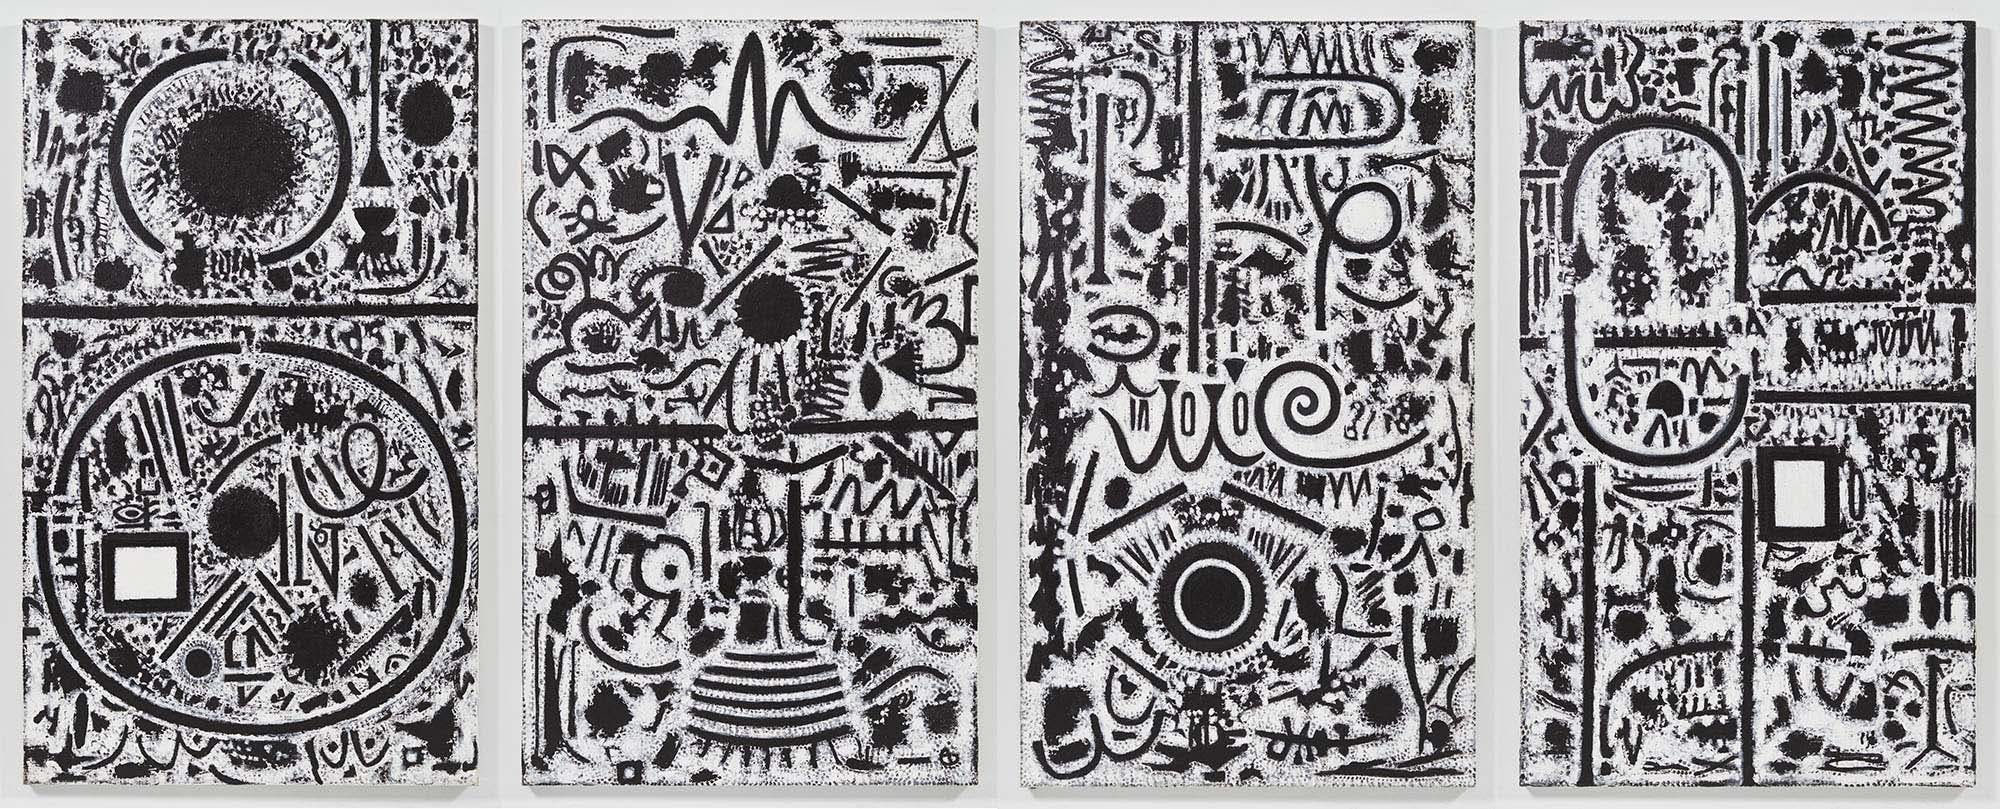 Wall of Signs
1979–80
Acrylic on linen
84 x 200 in. (213.4 x 508 cm)
 – The Richard Pousette-Dart Foundation